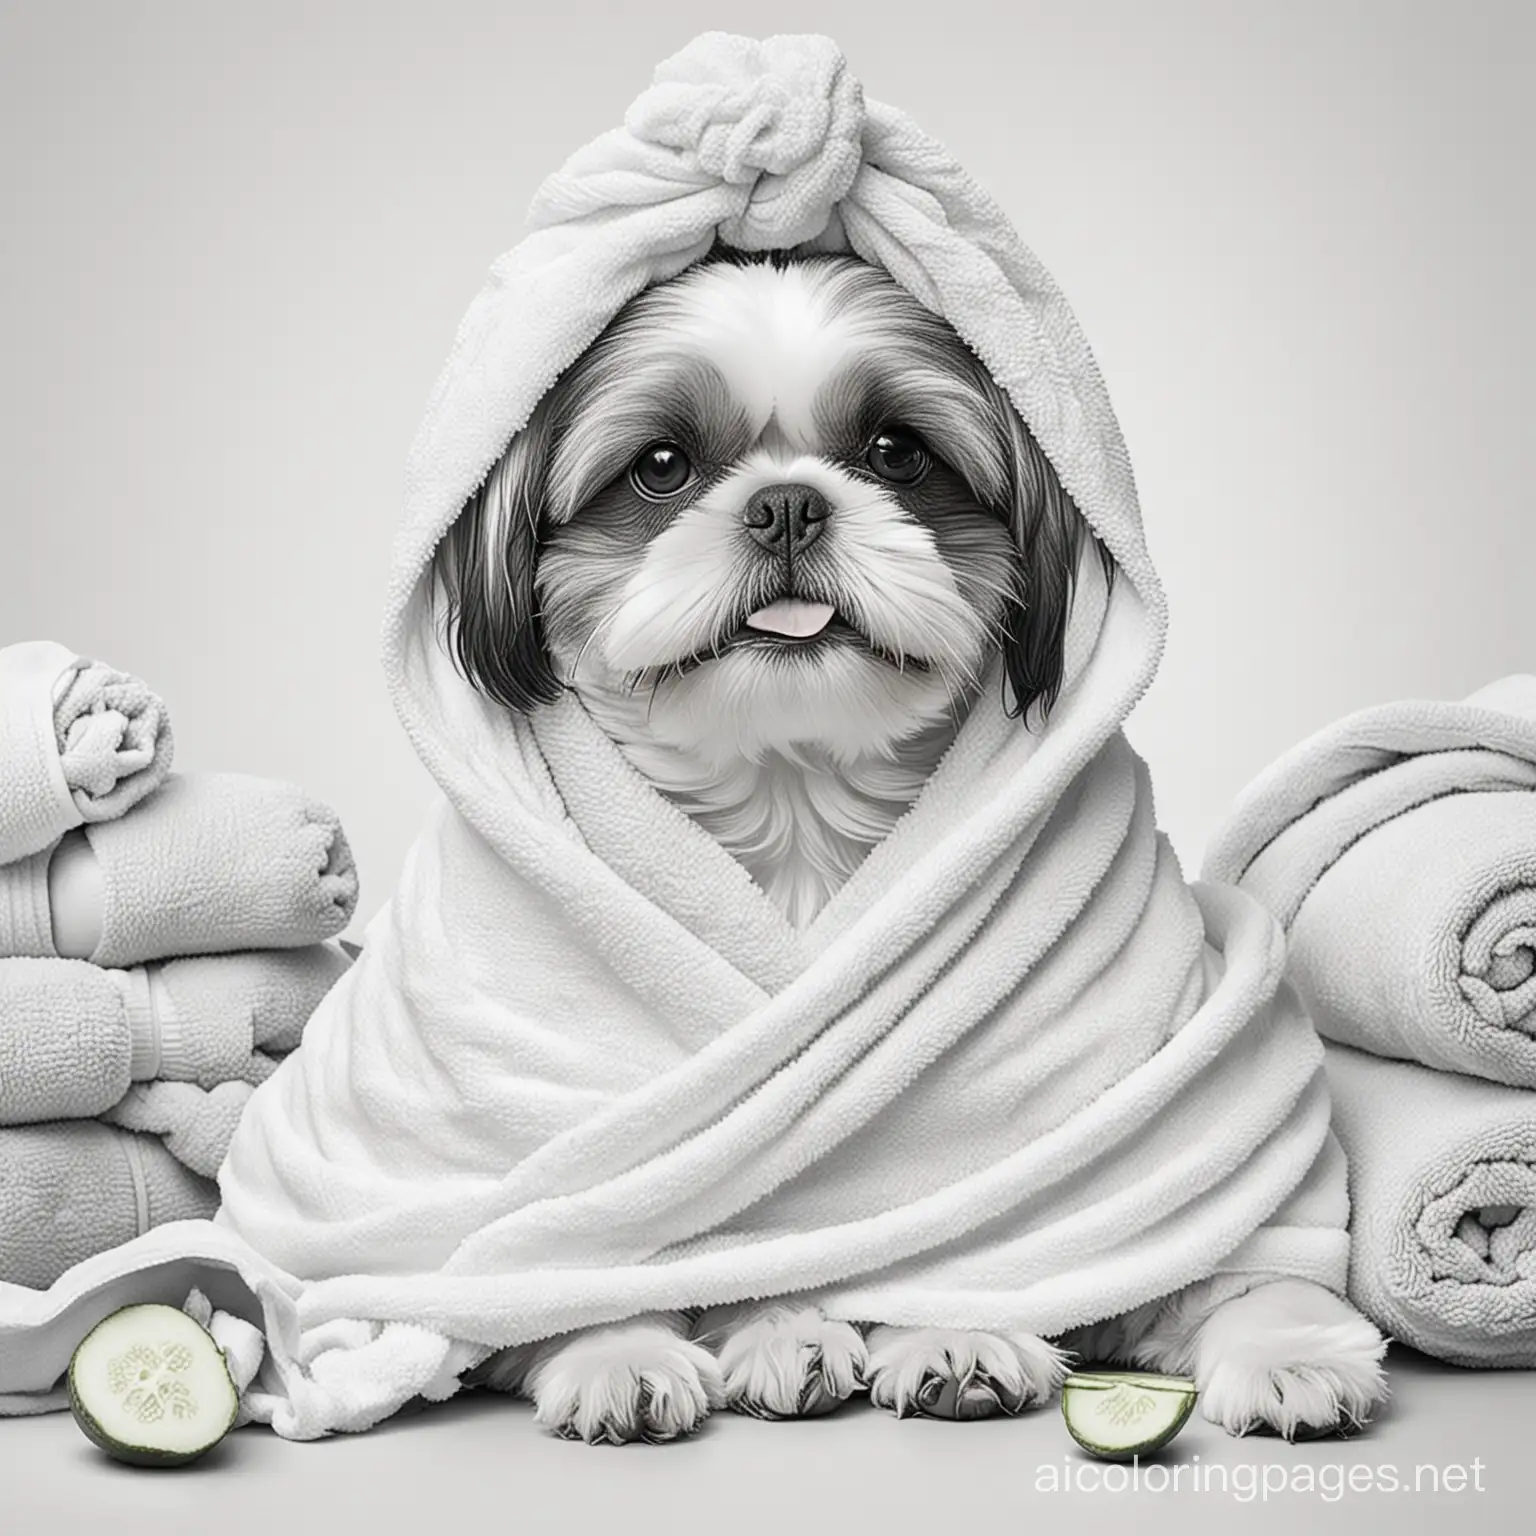 Shih-Tzu-Spa-Day-Cute-Dog-Relaxing-with-Cucumber-Eyes-Coloring-Page